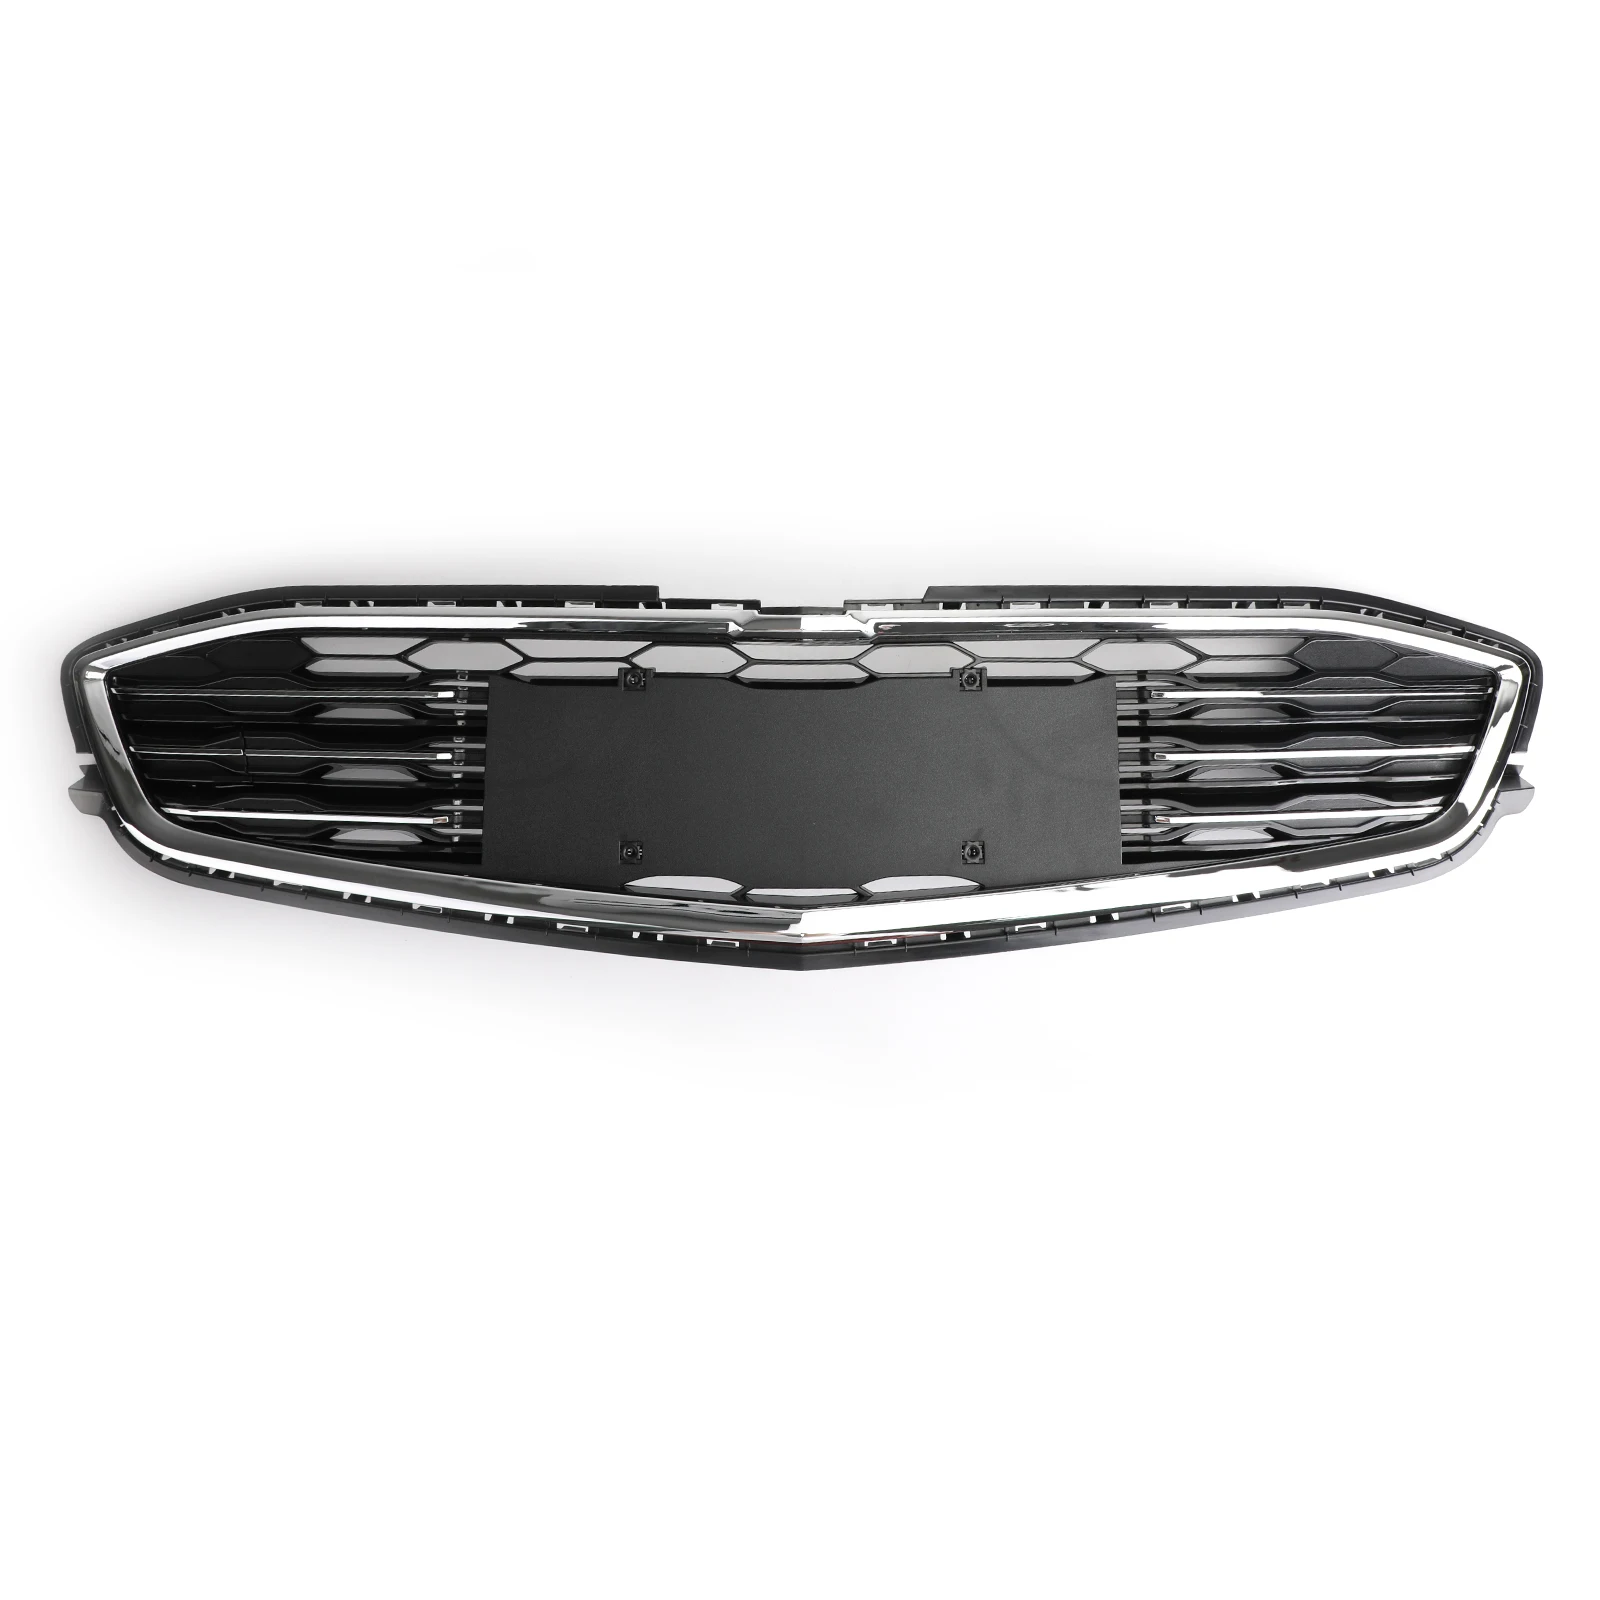 

Areyourshop Honeycomb Mesh Chrome Front Bumper Lower Grille For Chevy Malibu 2016 2017, As picture